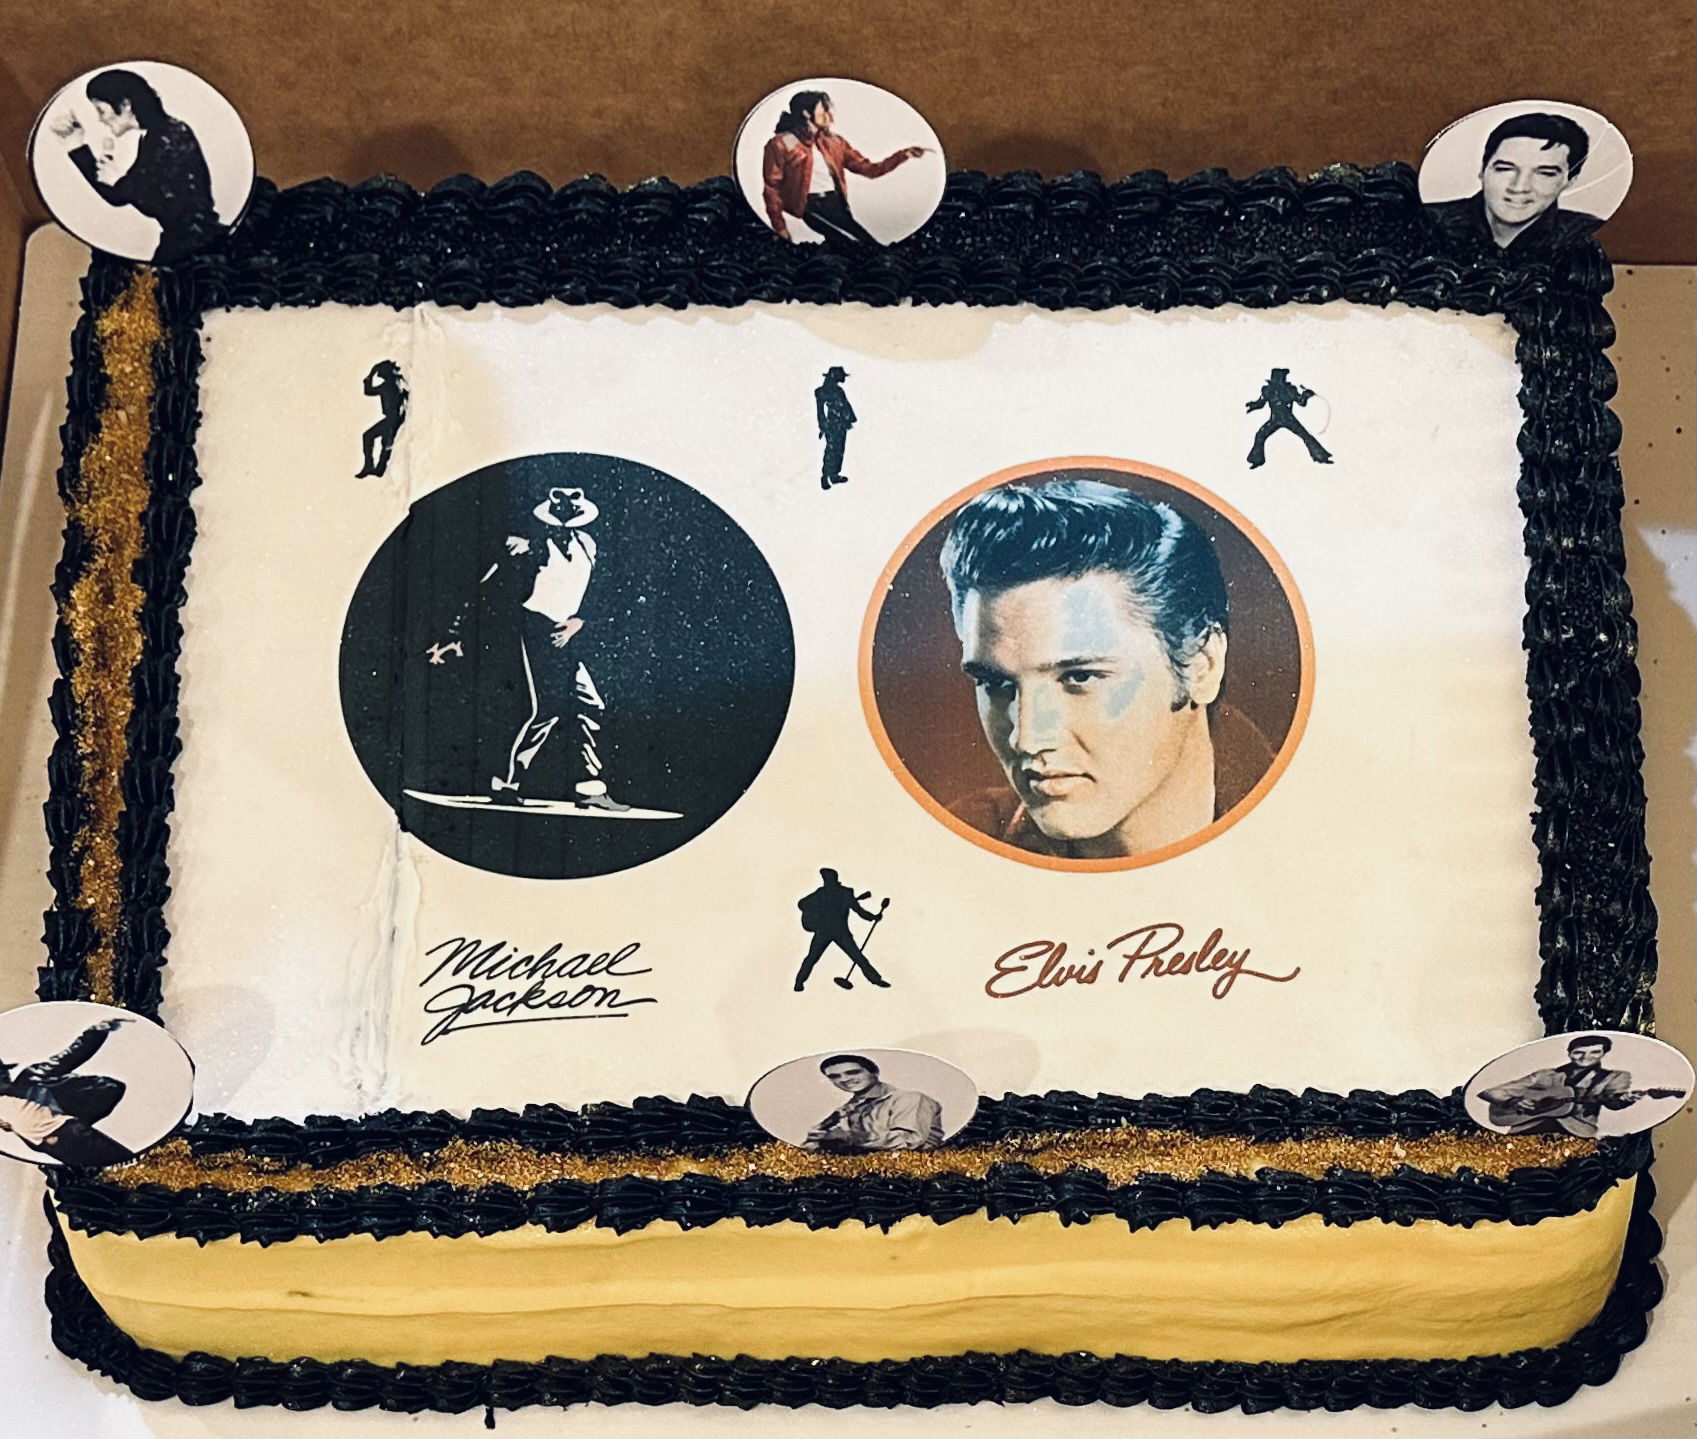 Elvis Presley & Michael Jackson Banana and Chocolate Sheet Cake with Buttercream Frosting and Edible Image